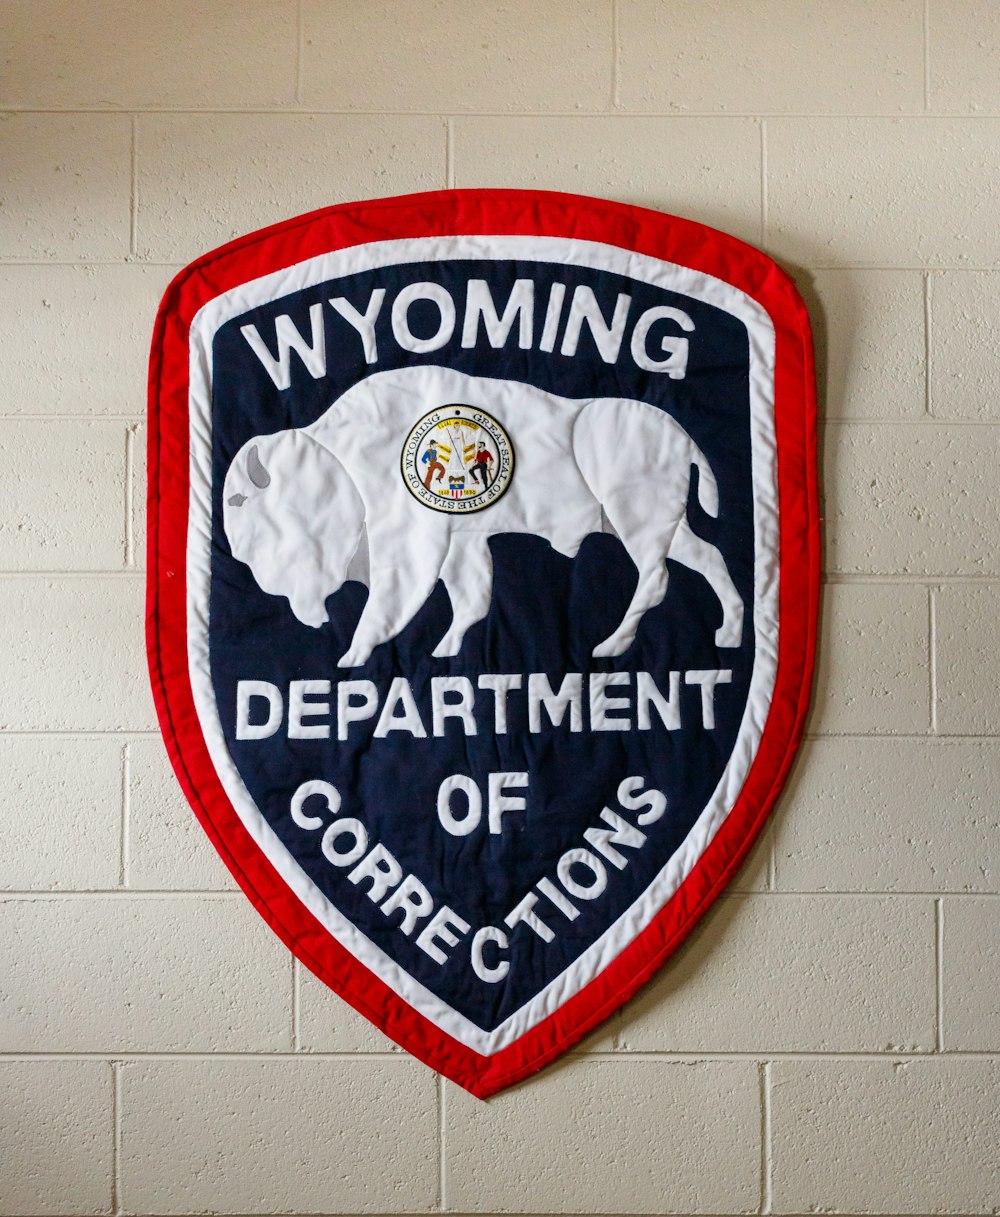 a sign on a wall that says wyoming department of corrections